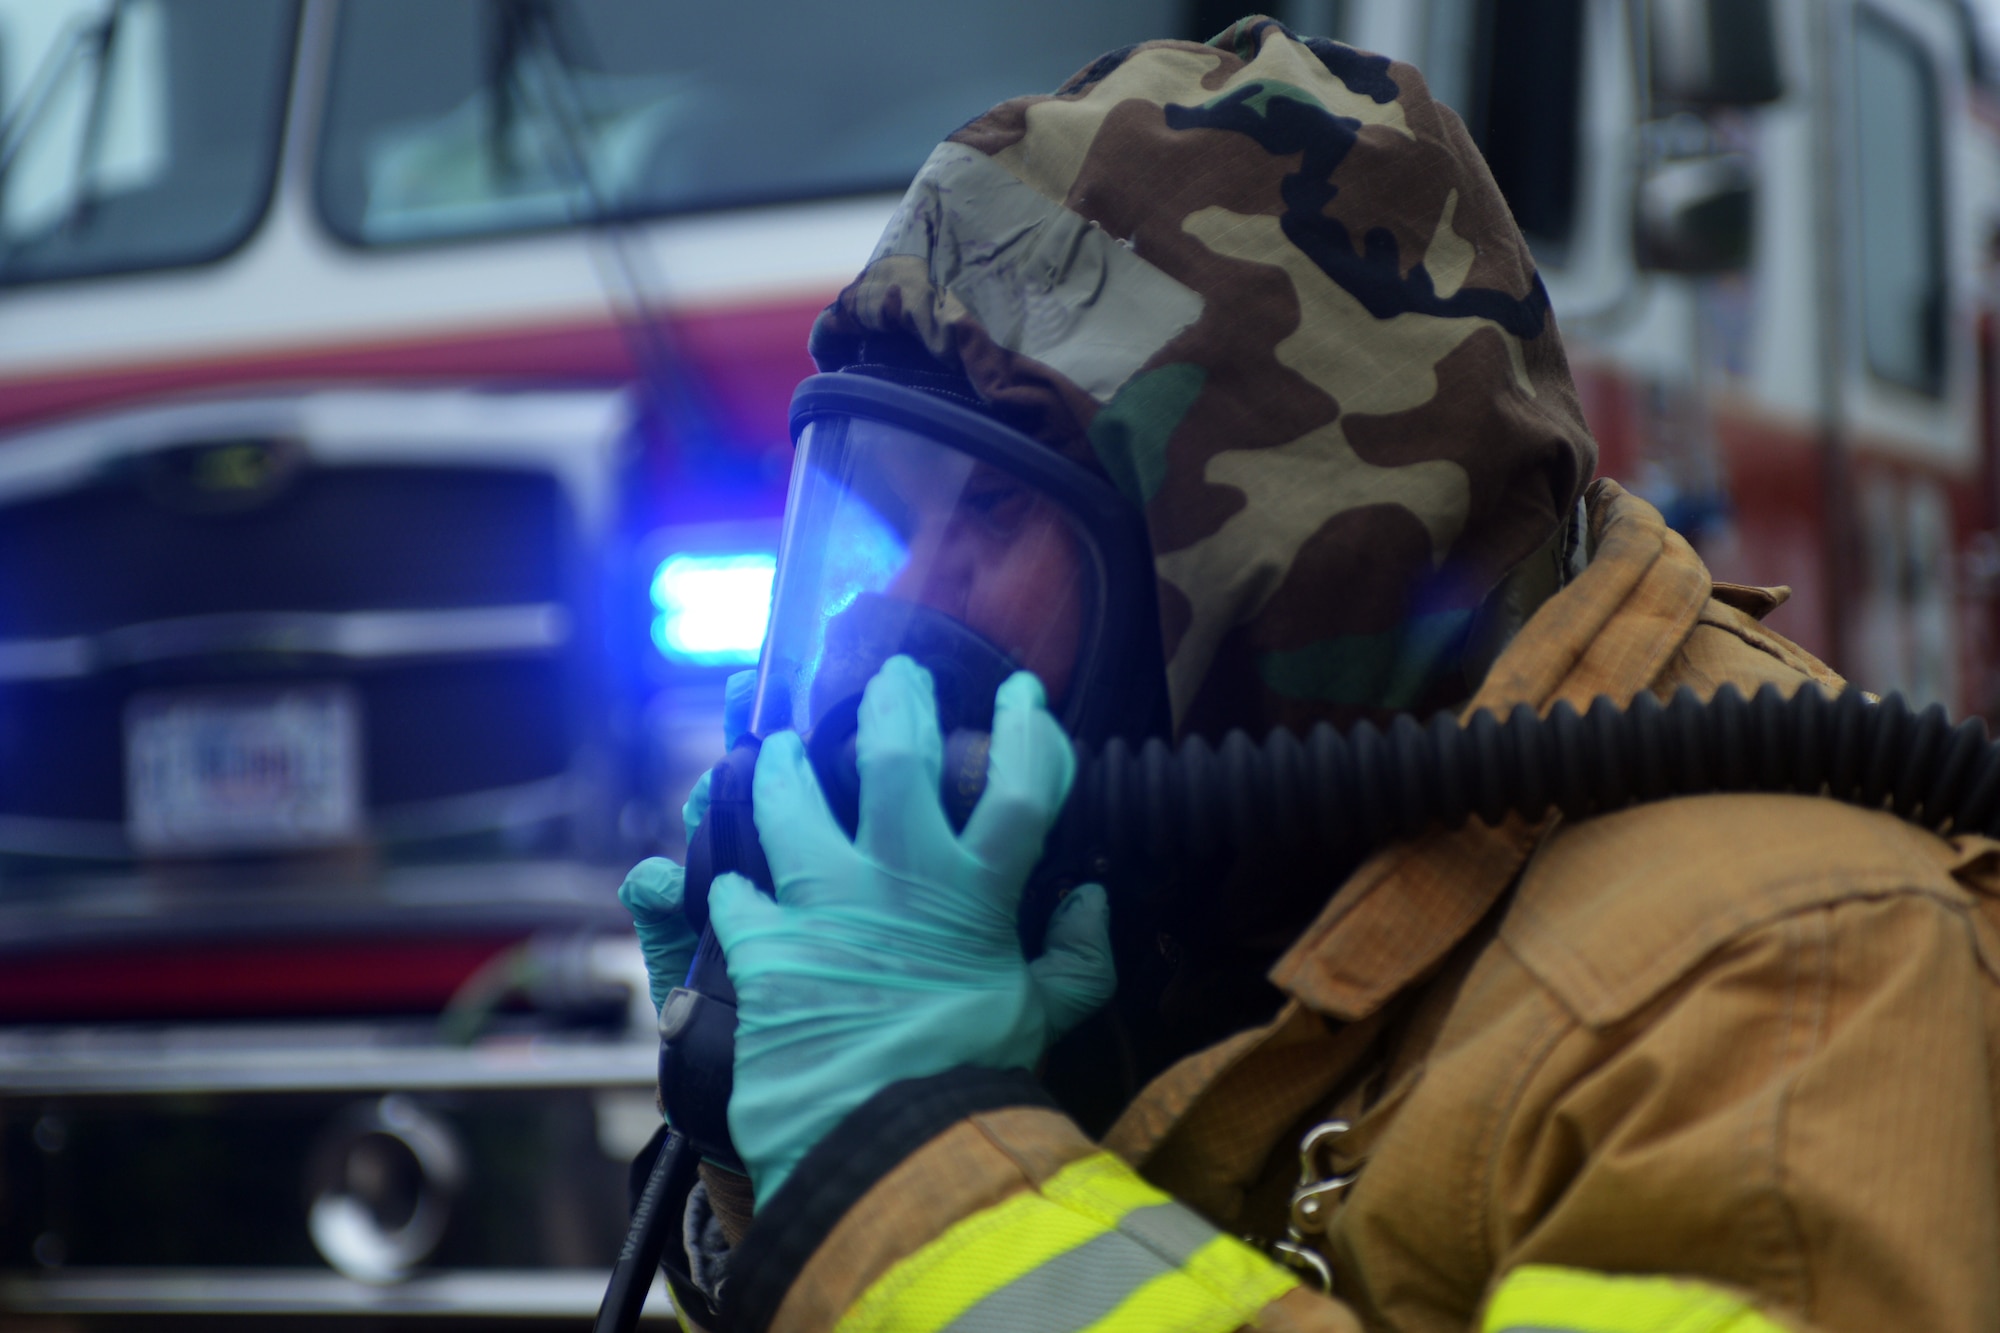 An Airman from 48th Civil Engineer Squadron adjusts his mask while responding to scenario during a readiness exercise at Royal Air Force Lakenheath, England, June 4, 2018. Exercise training emphasized a broad spectrum of elements from pre-attack preparedness, command and control, and protection of assets and personnel, to post-attack reconnaissance and self-aid buddy care for wounded wingmen. (U.S. Air Force photo by Master Sgt. Eric Burks) (Portions of this image have been obscured to protect operational security)